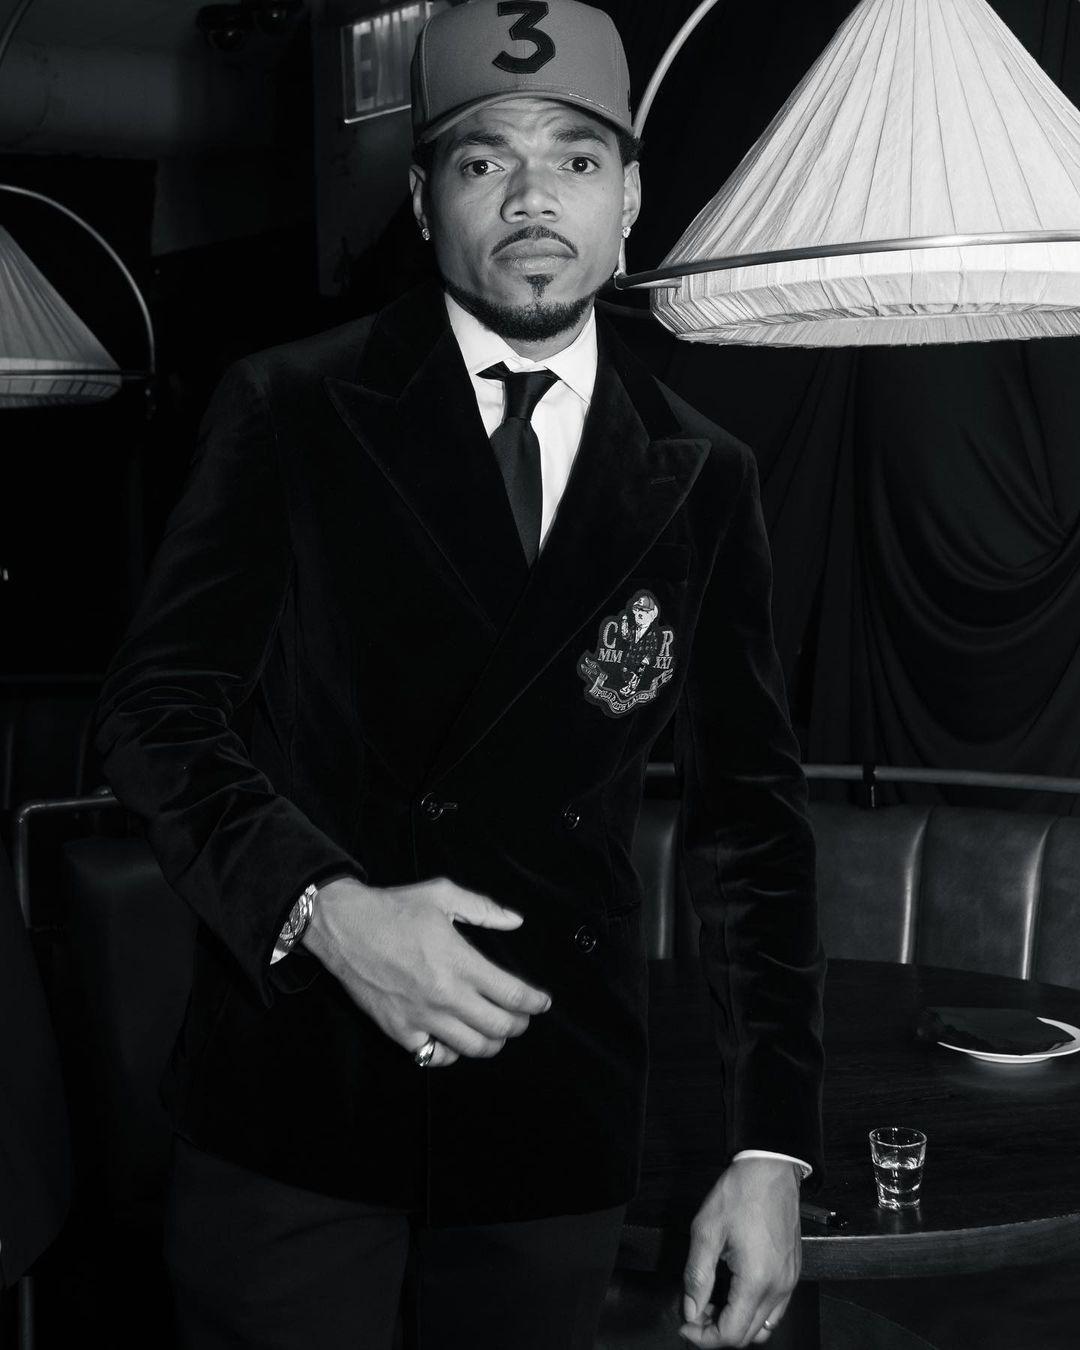 A black and white themed photo showing Chance The Rapper in a suit and hat.